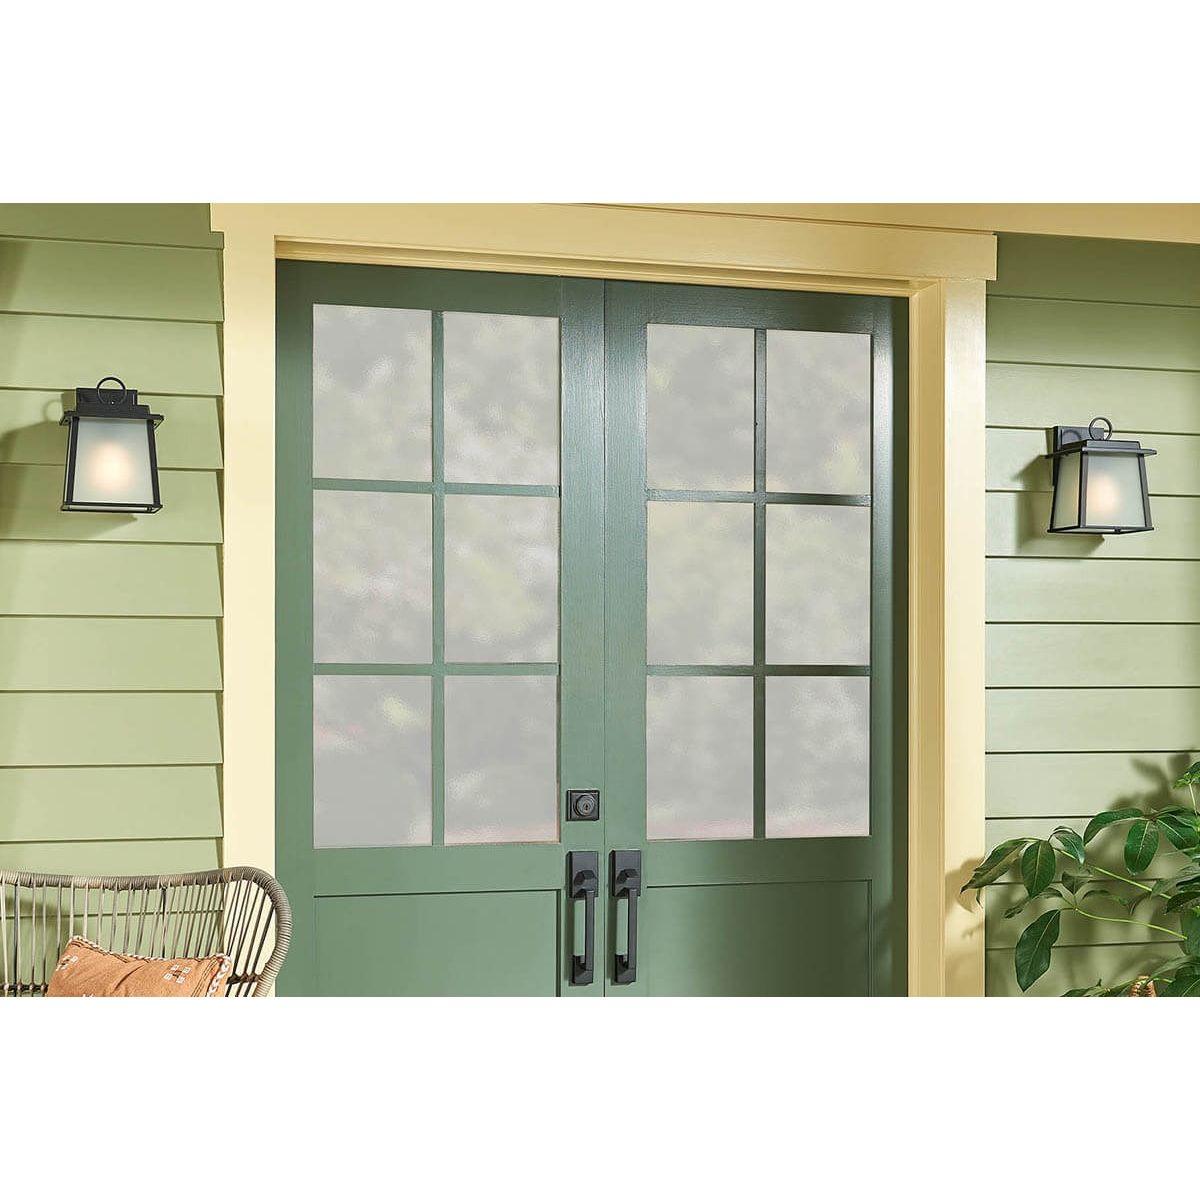 Noward 10 in. Outdoor Wall Sconce